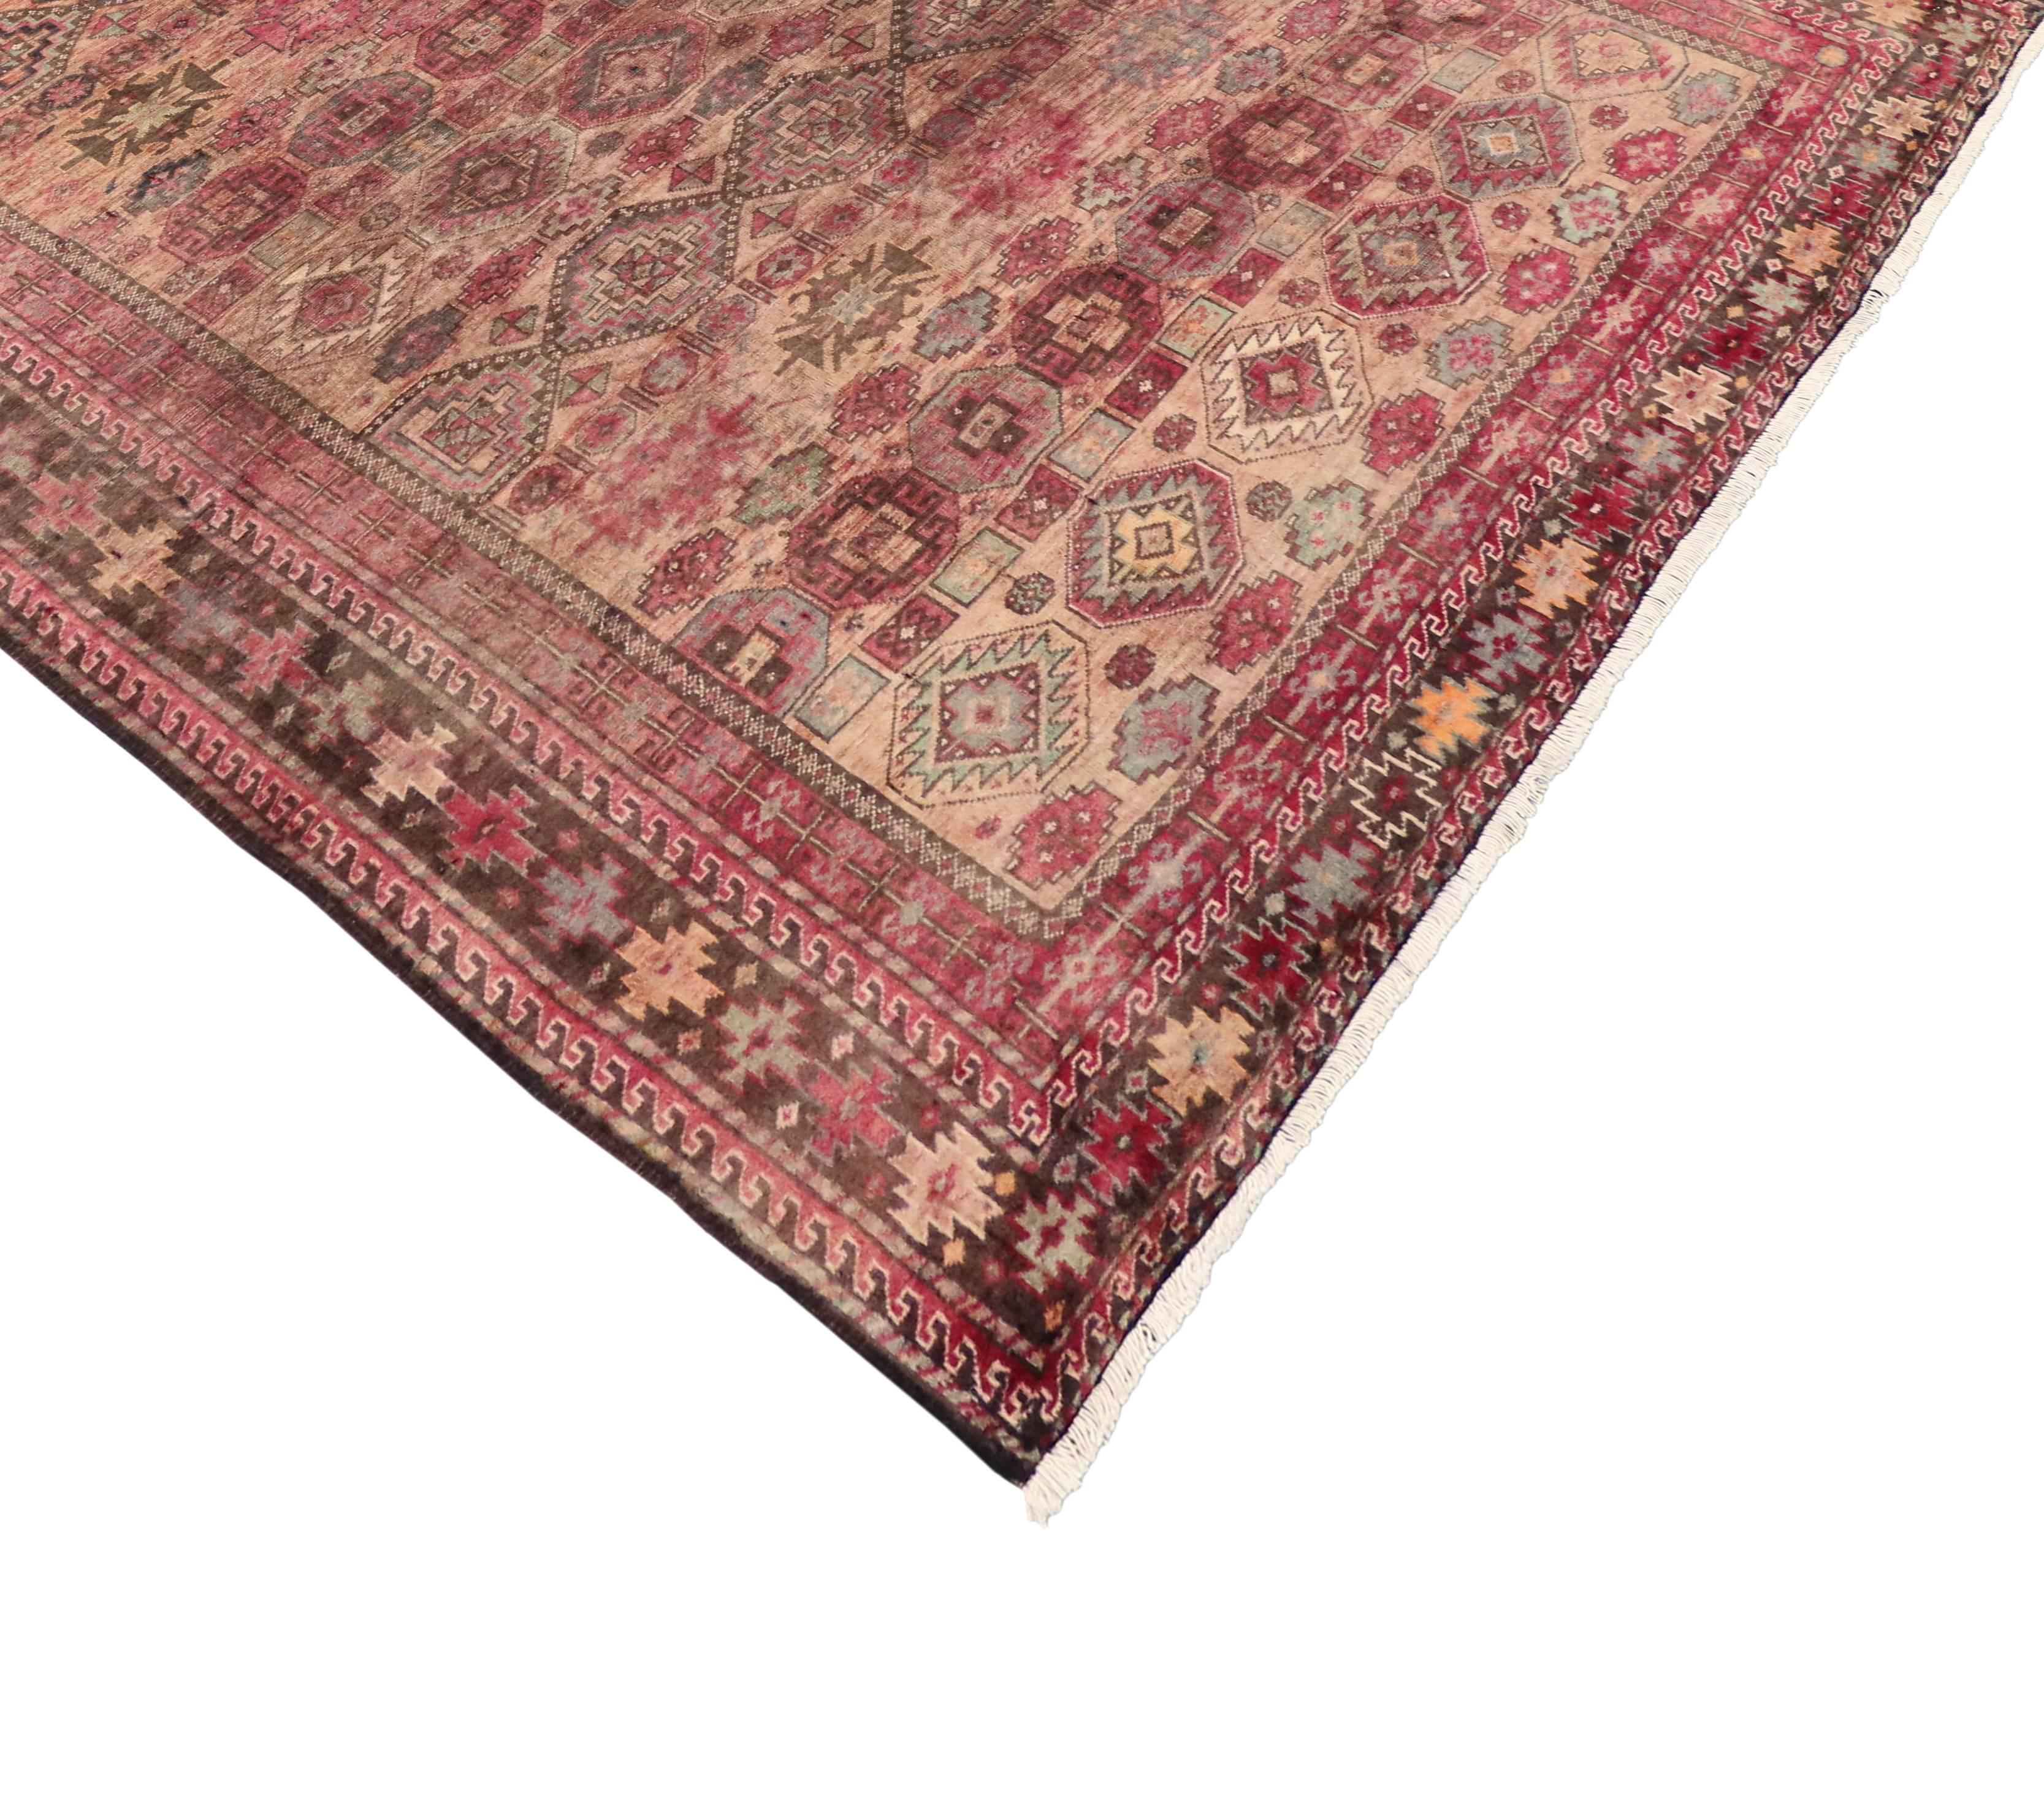 76544 Vintage Persian Baluch Rug with Modern Tribal Style, Pink Persian Area Rug. Features all-over geometric and tribal motifs in an abrash field of soft colors. Rendered in variegated shades of raspberry, pink, blush, apricot, grey and brown with